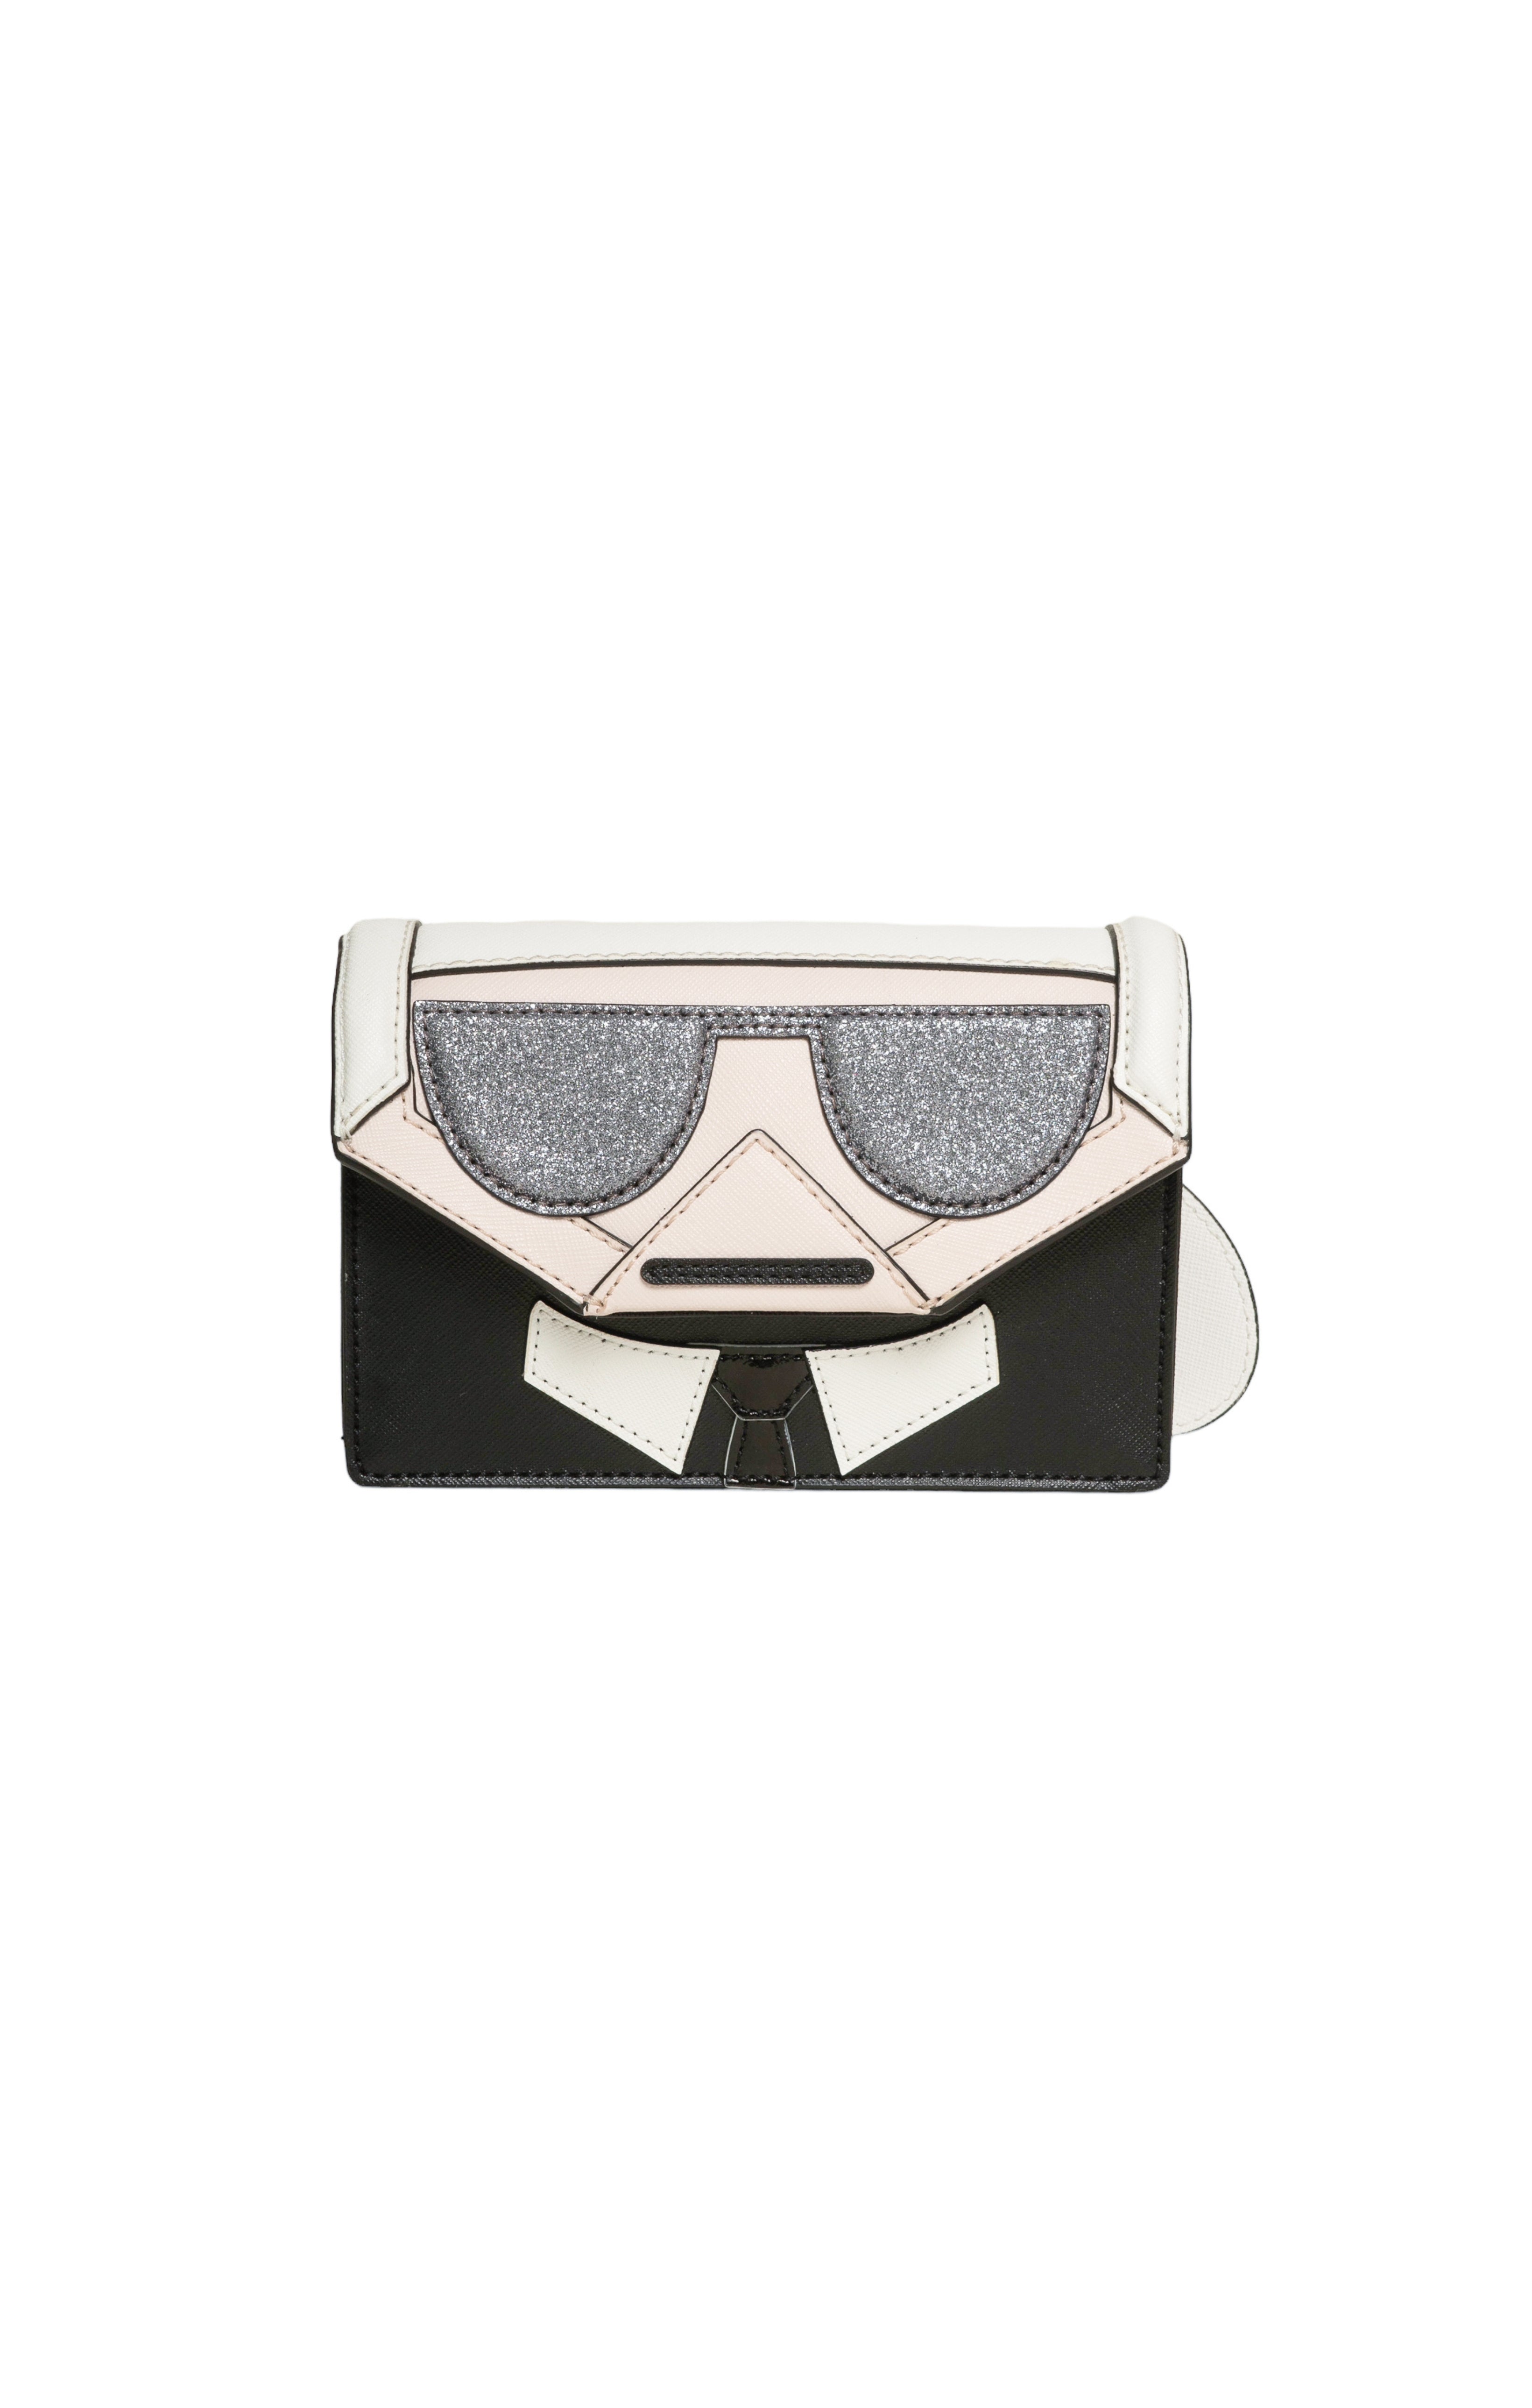 KARL LAGERFELD (NEW) with tags Bag Size: 7.625" x 2.125" x 4.5"; 24.75" strap